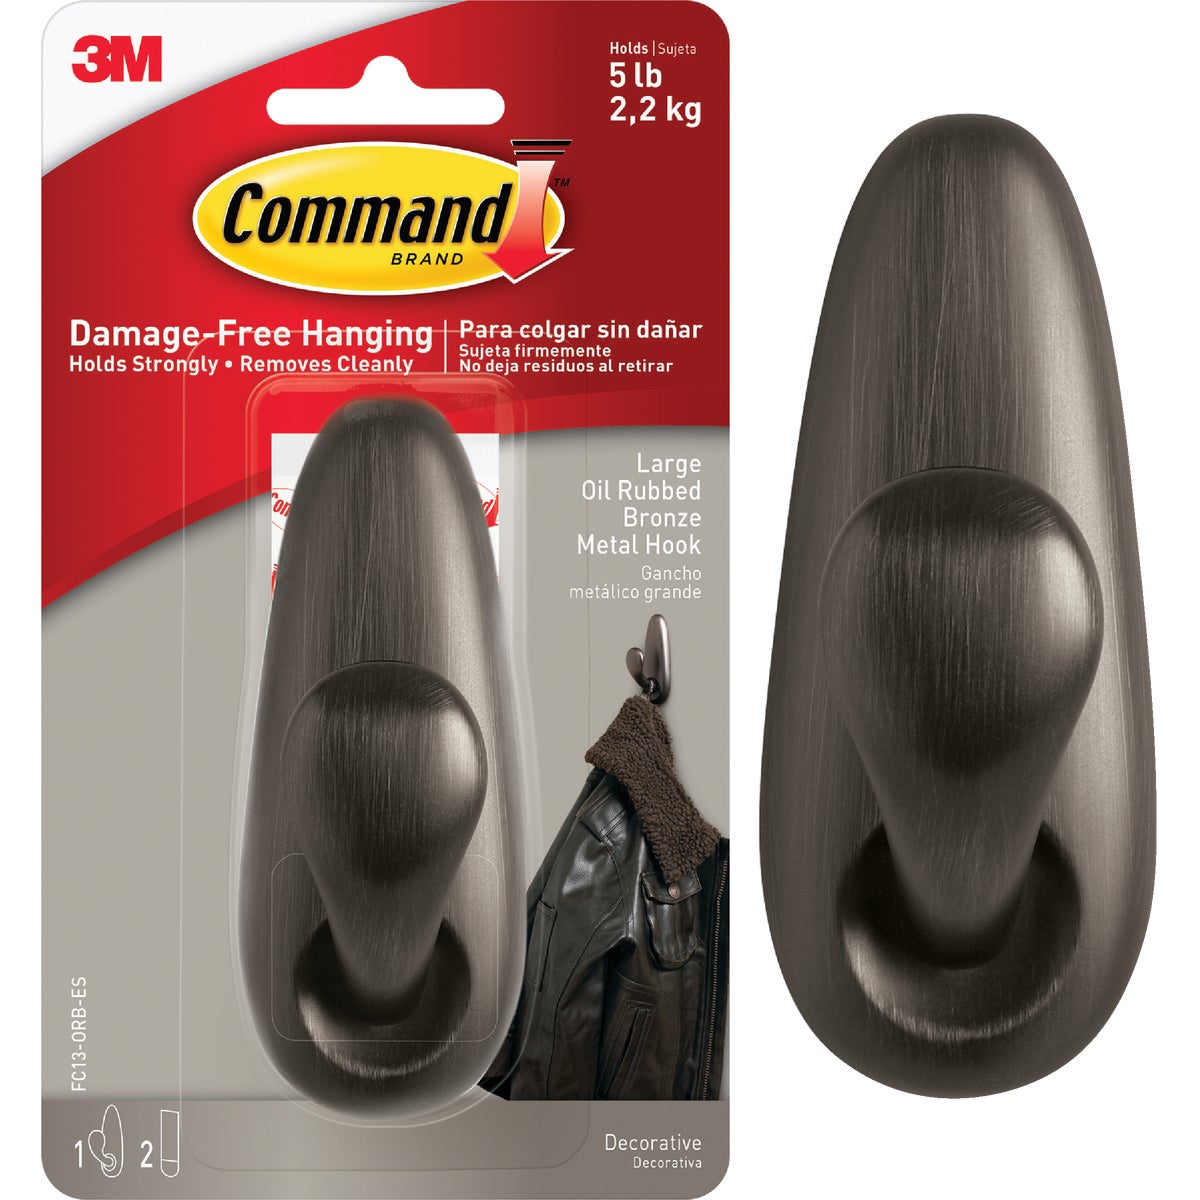 Command Large Oil Rubbed Bronze Metal Adhesive Hook